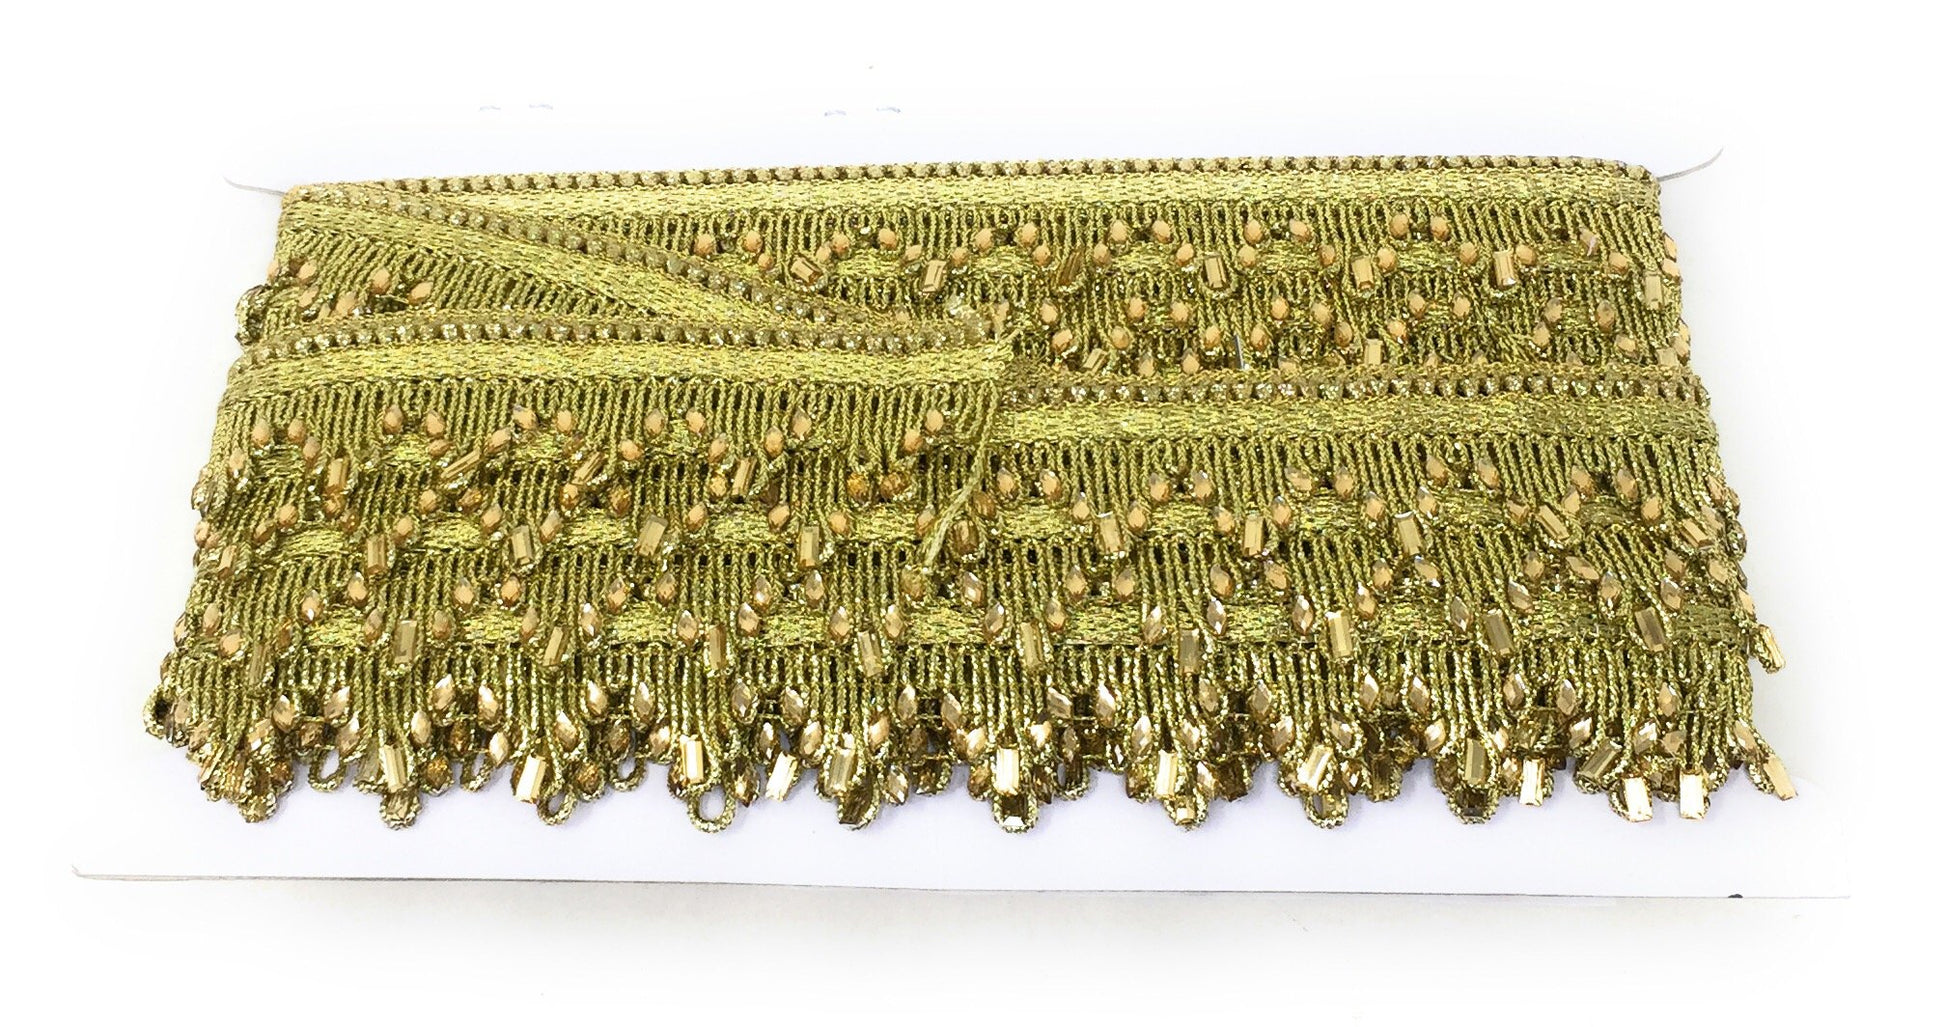 Light Gold Beaded Embroidered Saree Border Trim - 9 Meter Roll